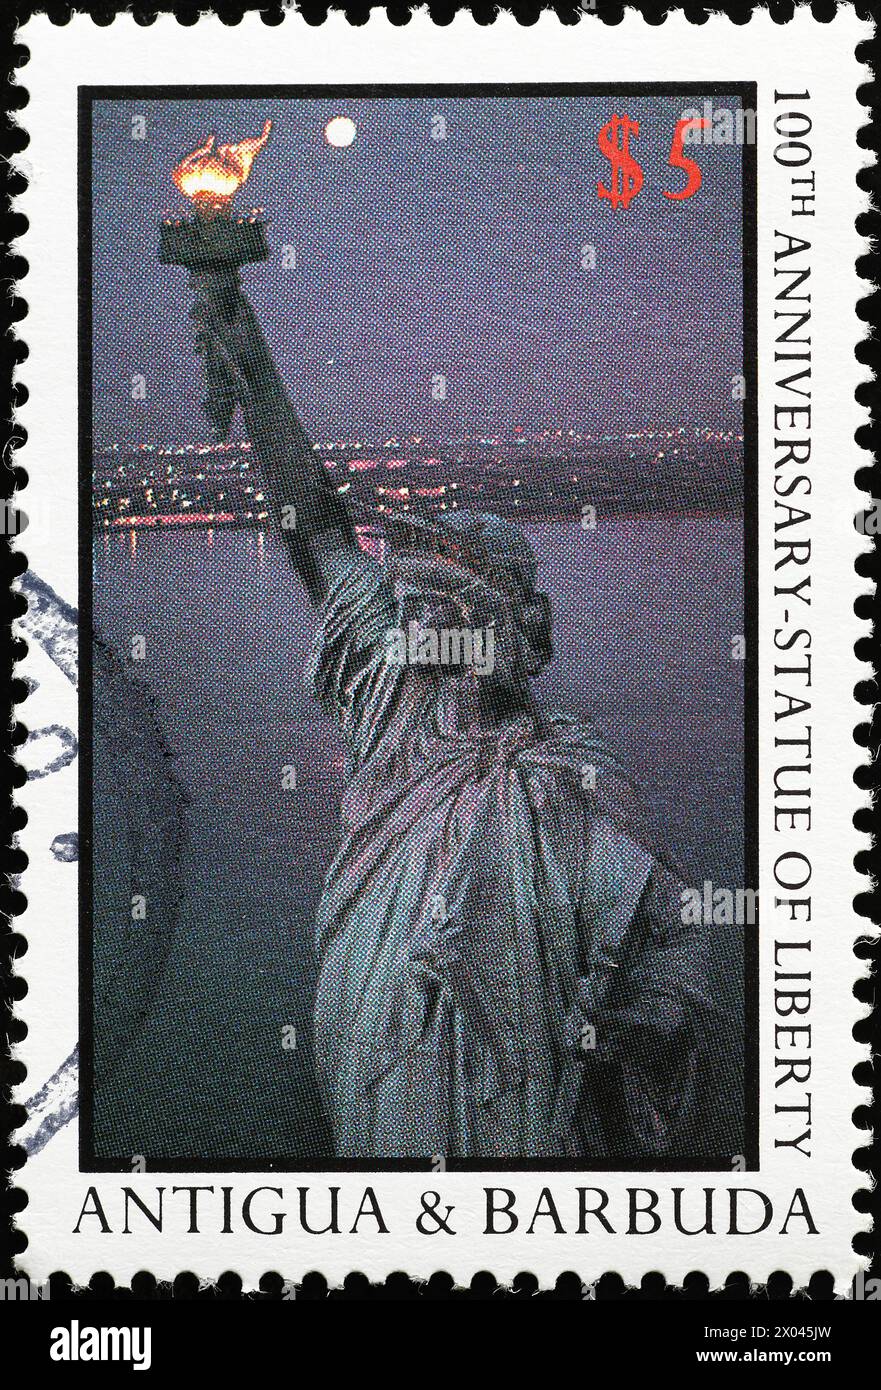 100th anniversary of Statue of Liberty celebrated on stamp Stock Photo